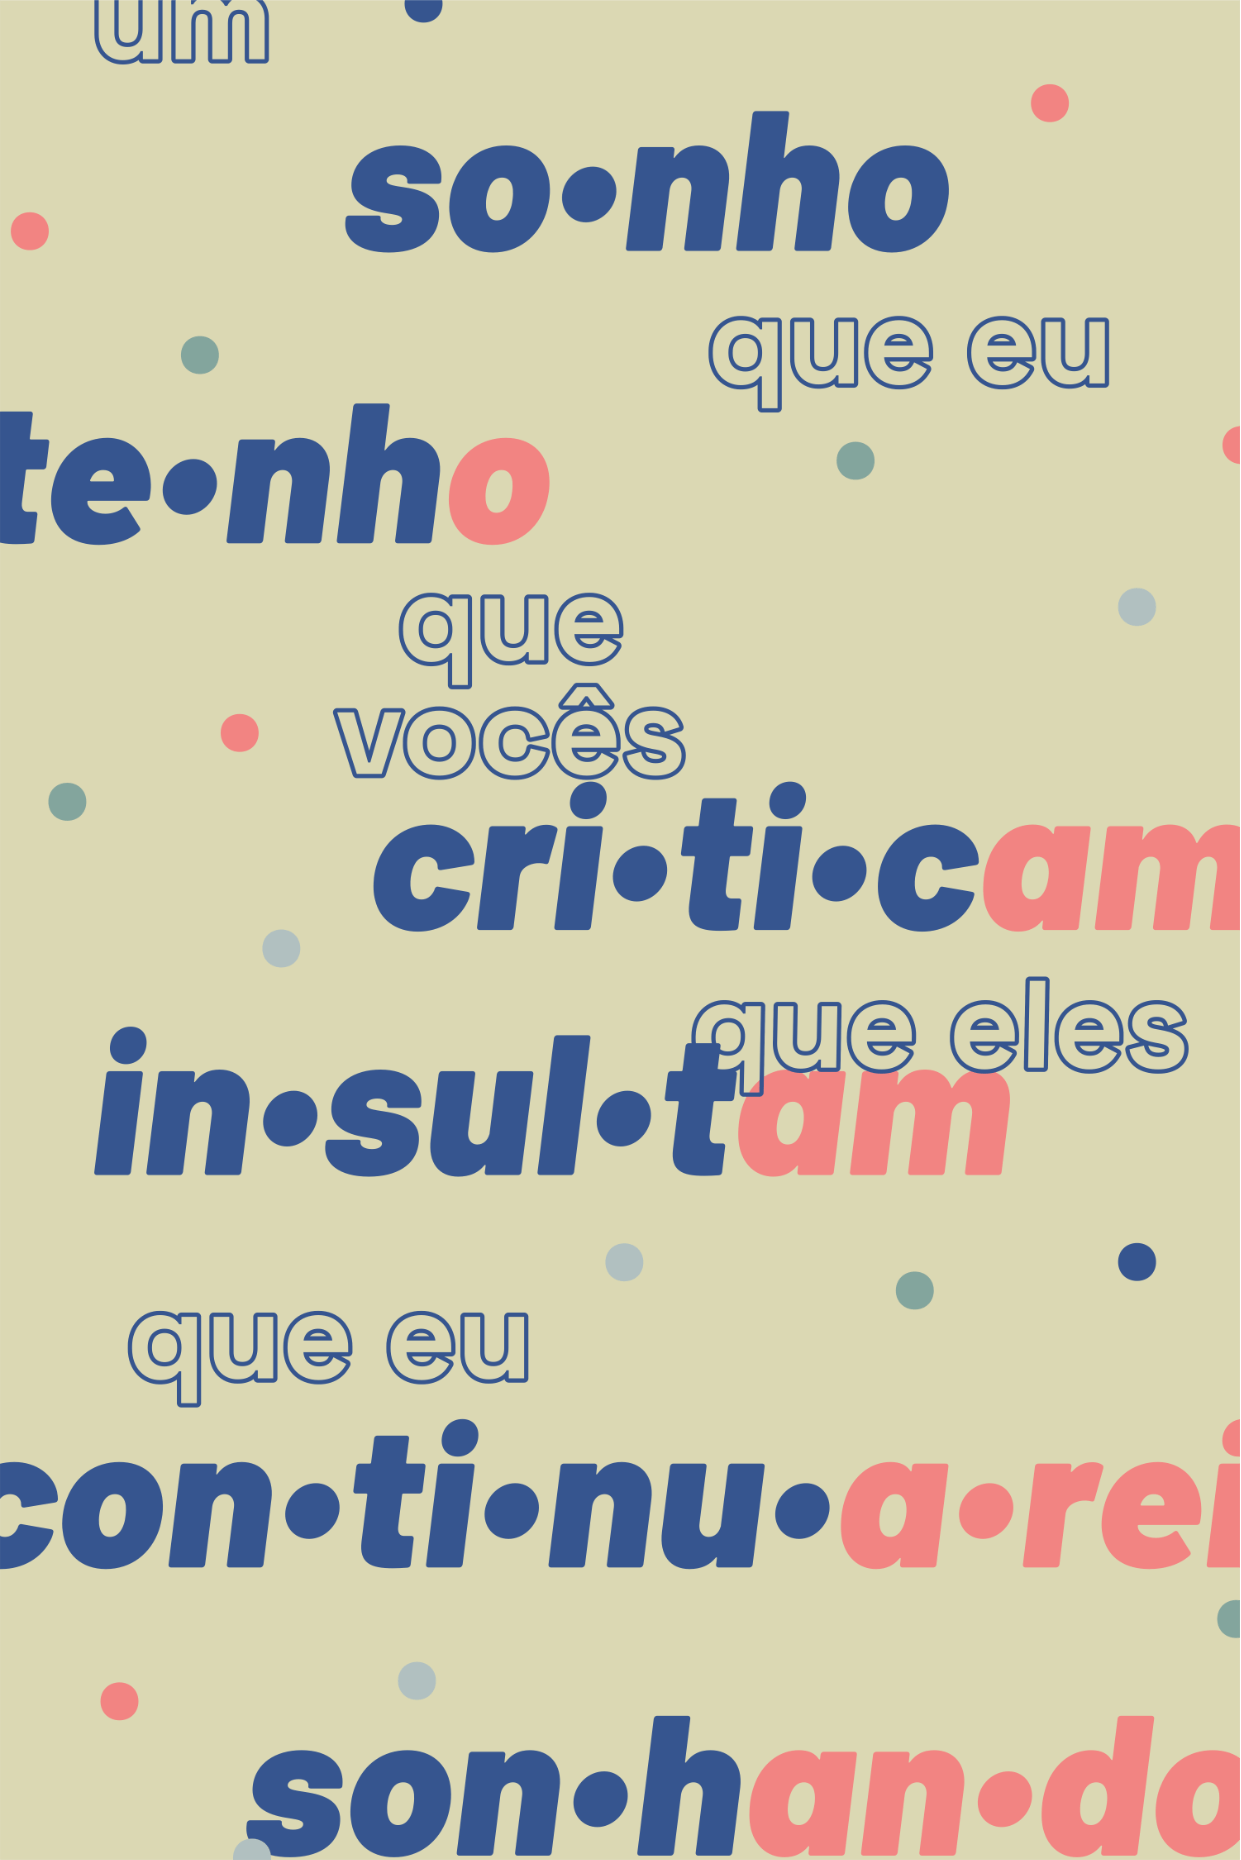 using Portuguese to highlight the complexity of verb conjugations. compared to many other languages, including English and Japanese, Portuguese has a great amount of different verb forms.